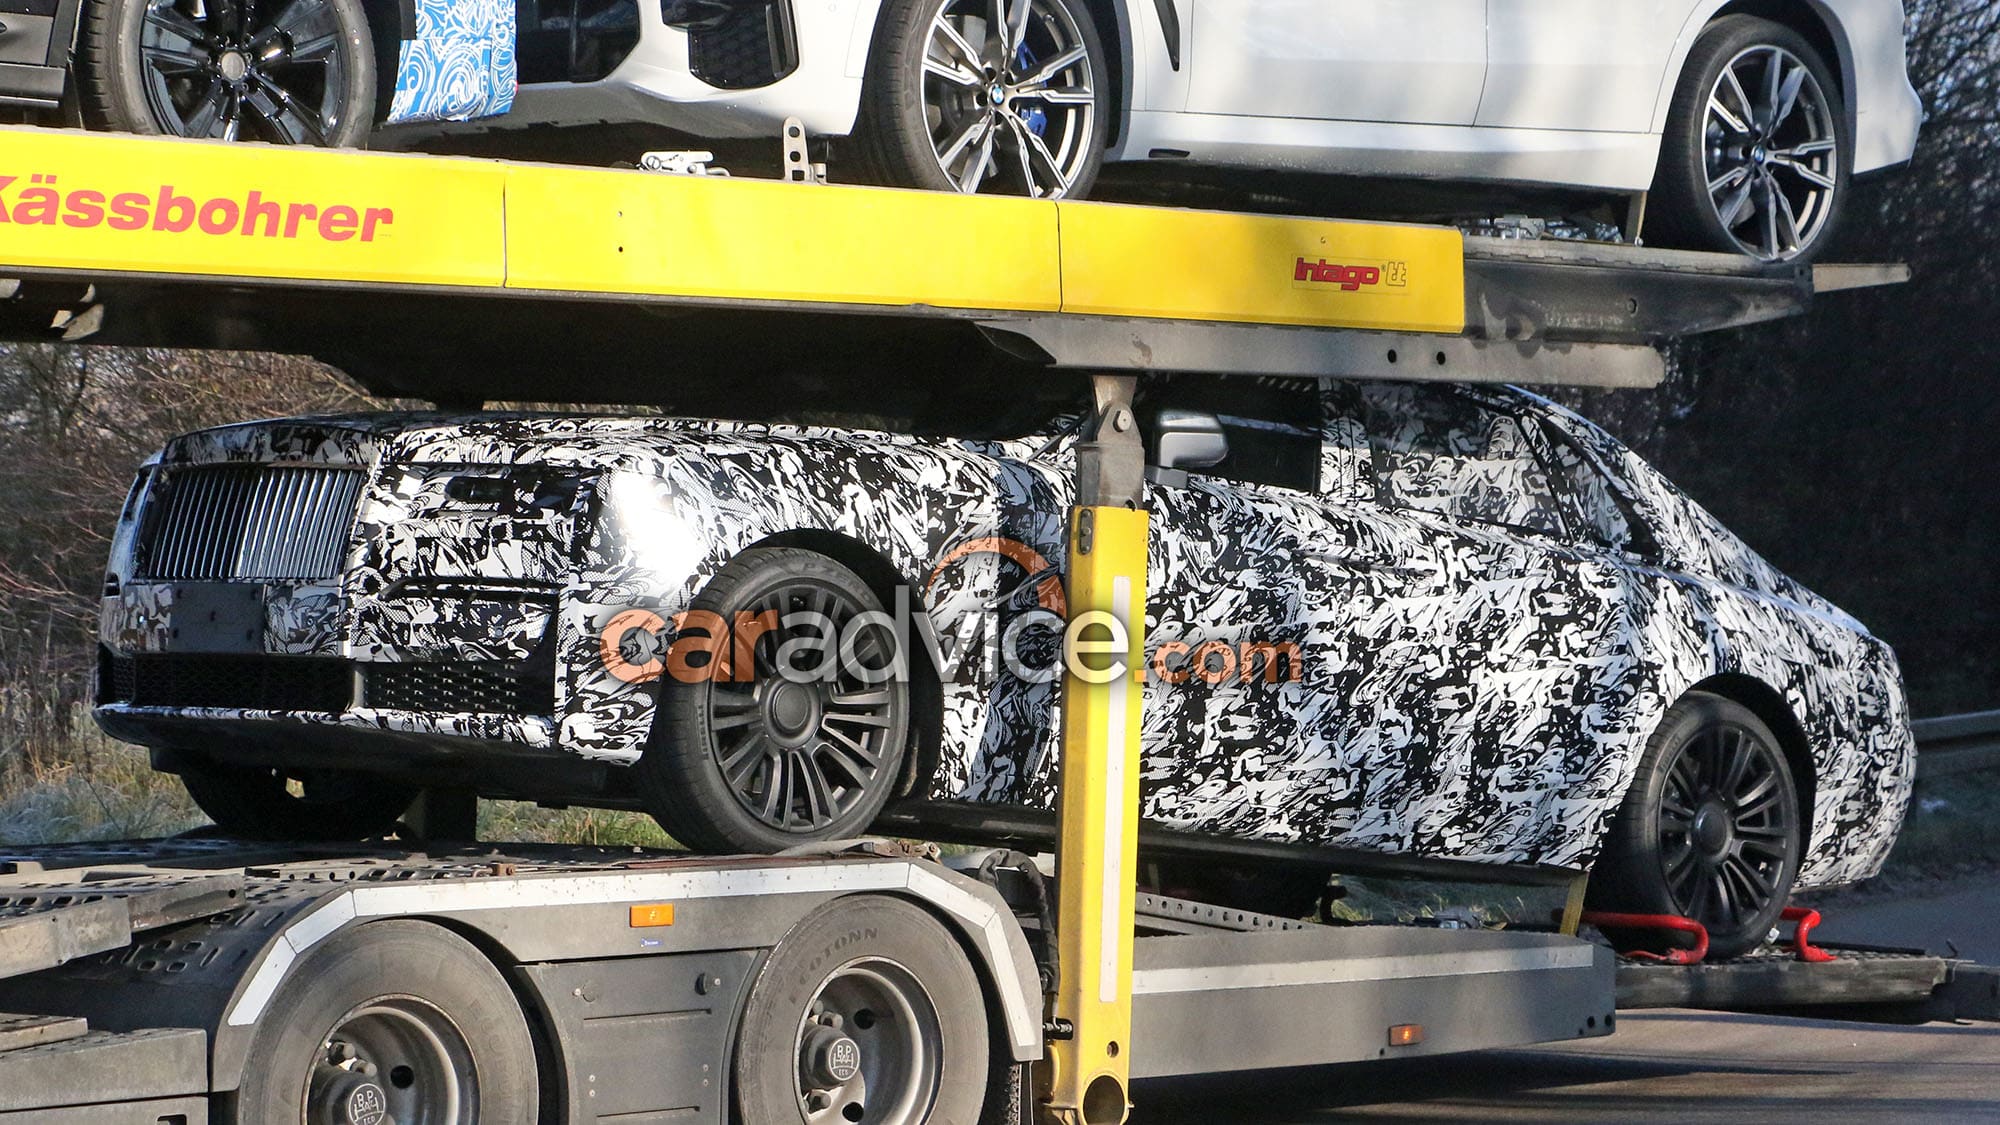 2021 Rolls Royce Ghost Spied With Less Camouflage Caradvice